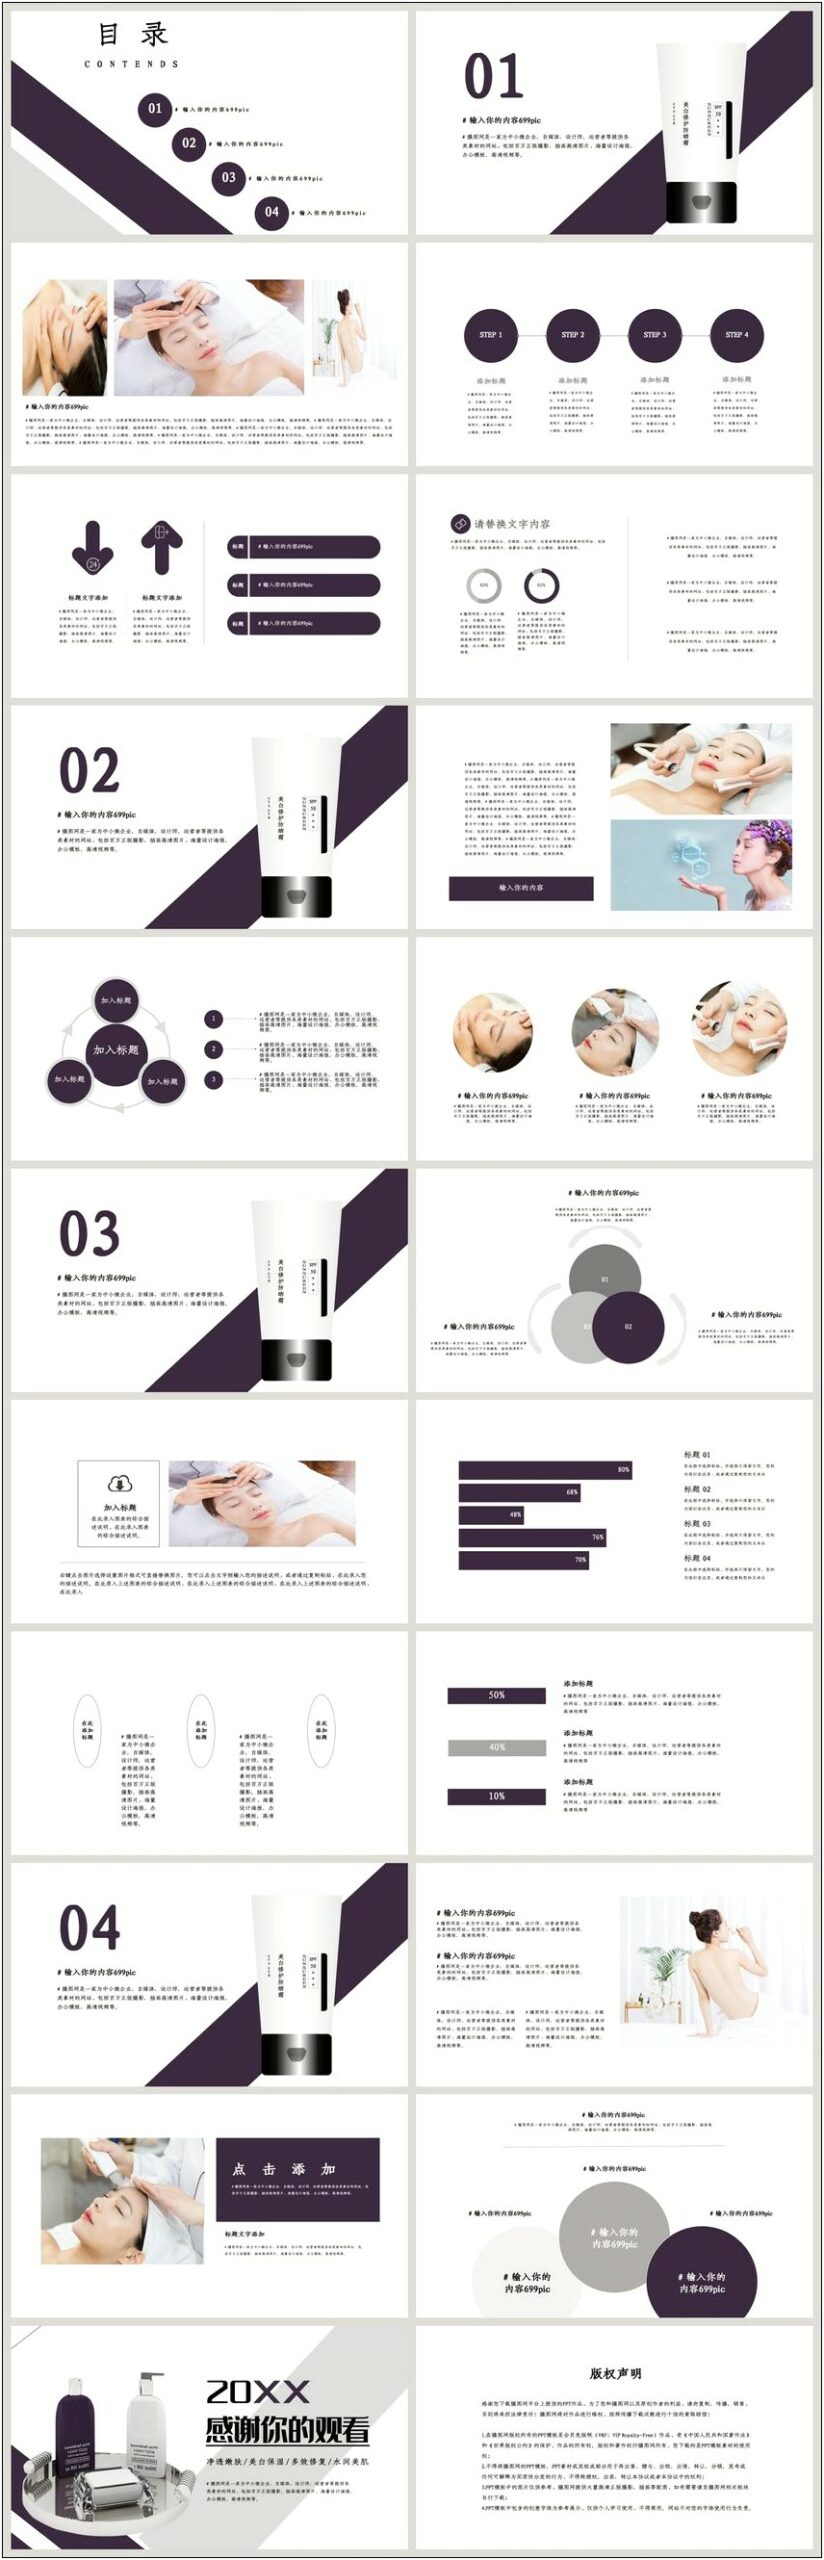 Skin Care Powerpoint Templates Free Download